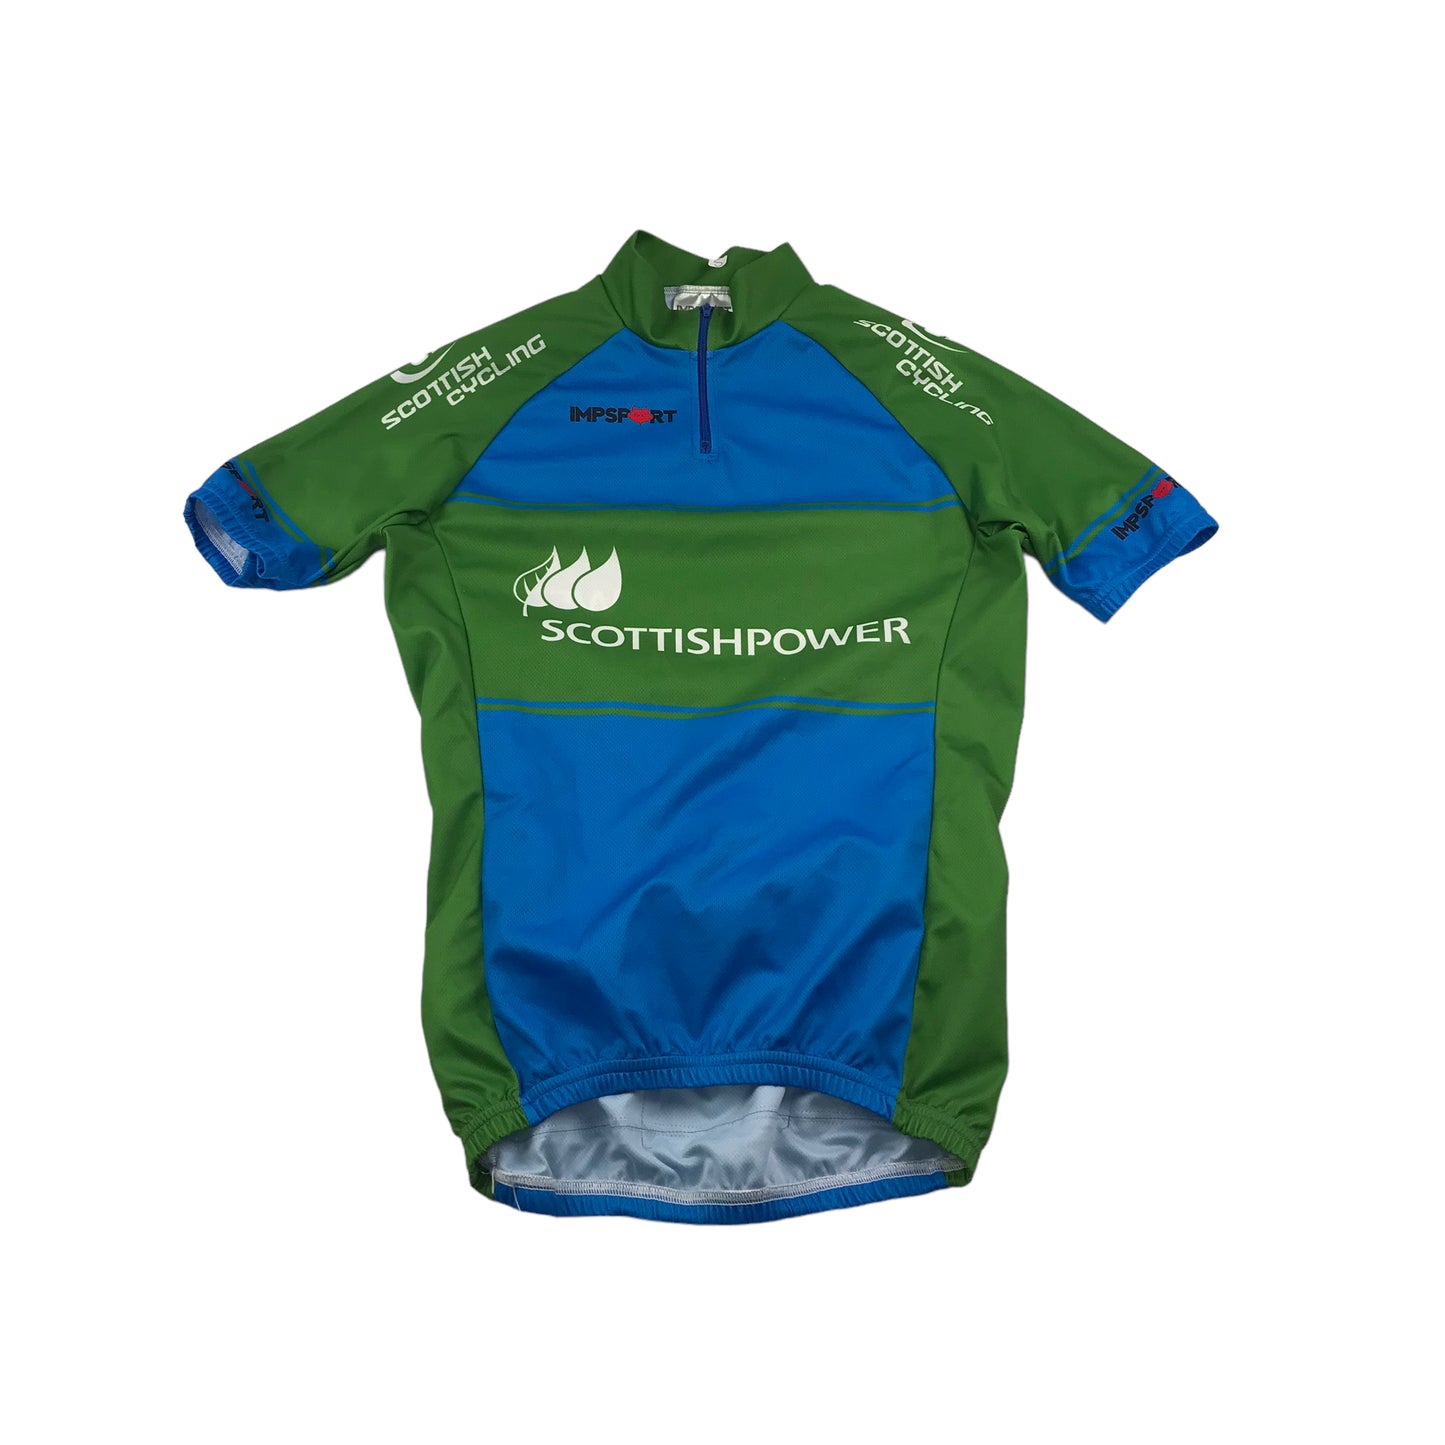 Impsport Green and Blue Short Sleeve Cycling Sports Top Adult Size S